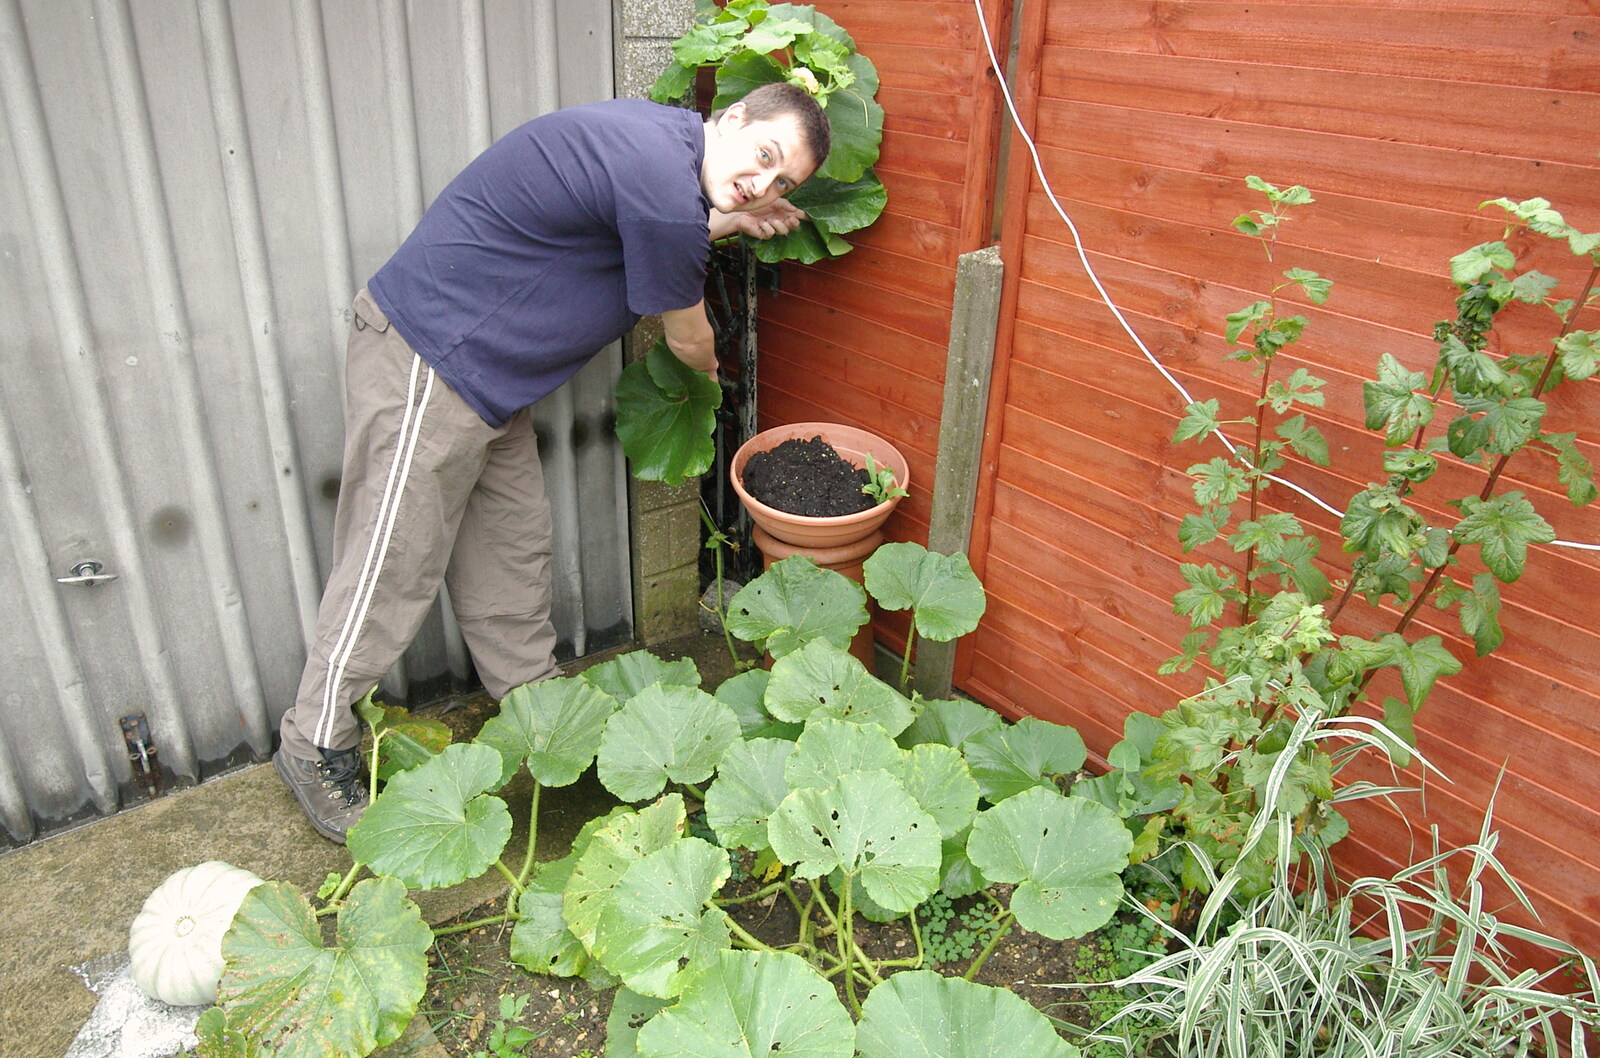 Andrew points to one of his prized marrows from Cambridge Floods, Curry Night and an Ipswich Monsoon - 10th September 2005